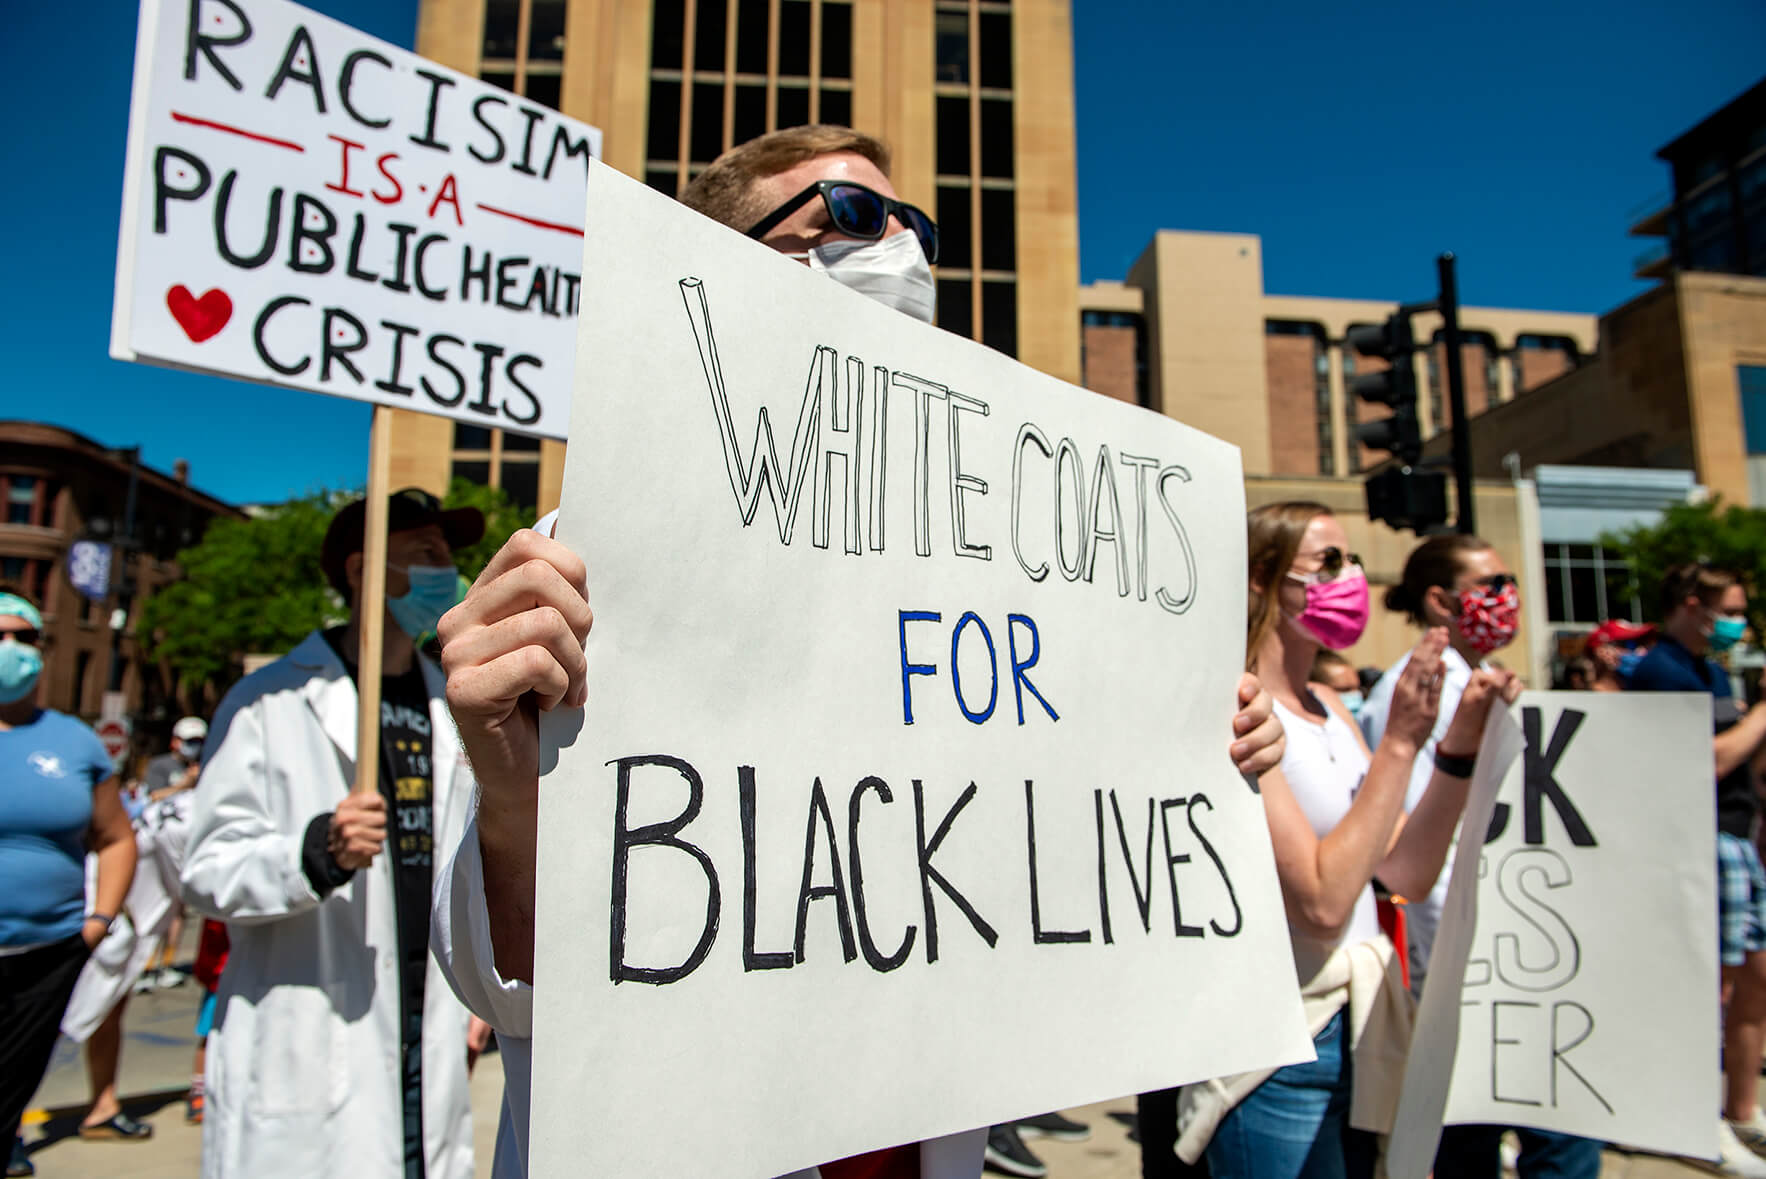 Close up on student holding sign reading "White coats for Black Lives"